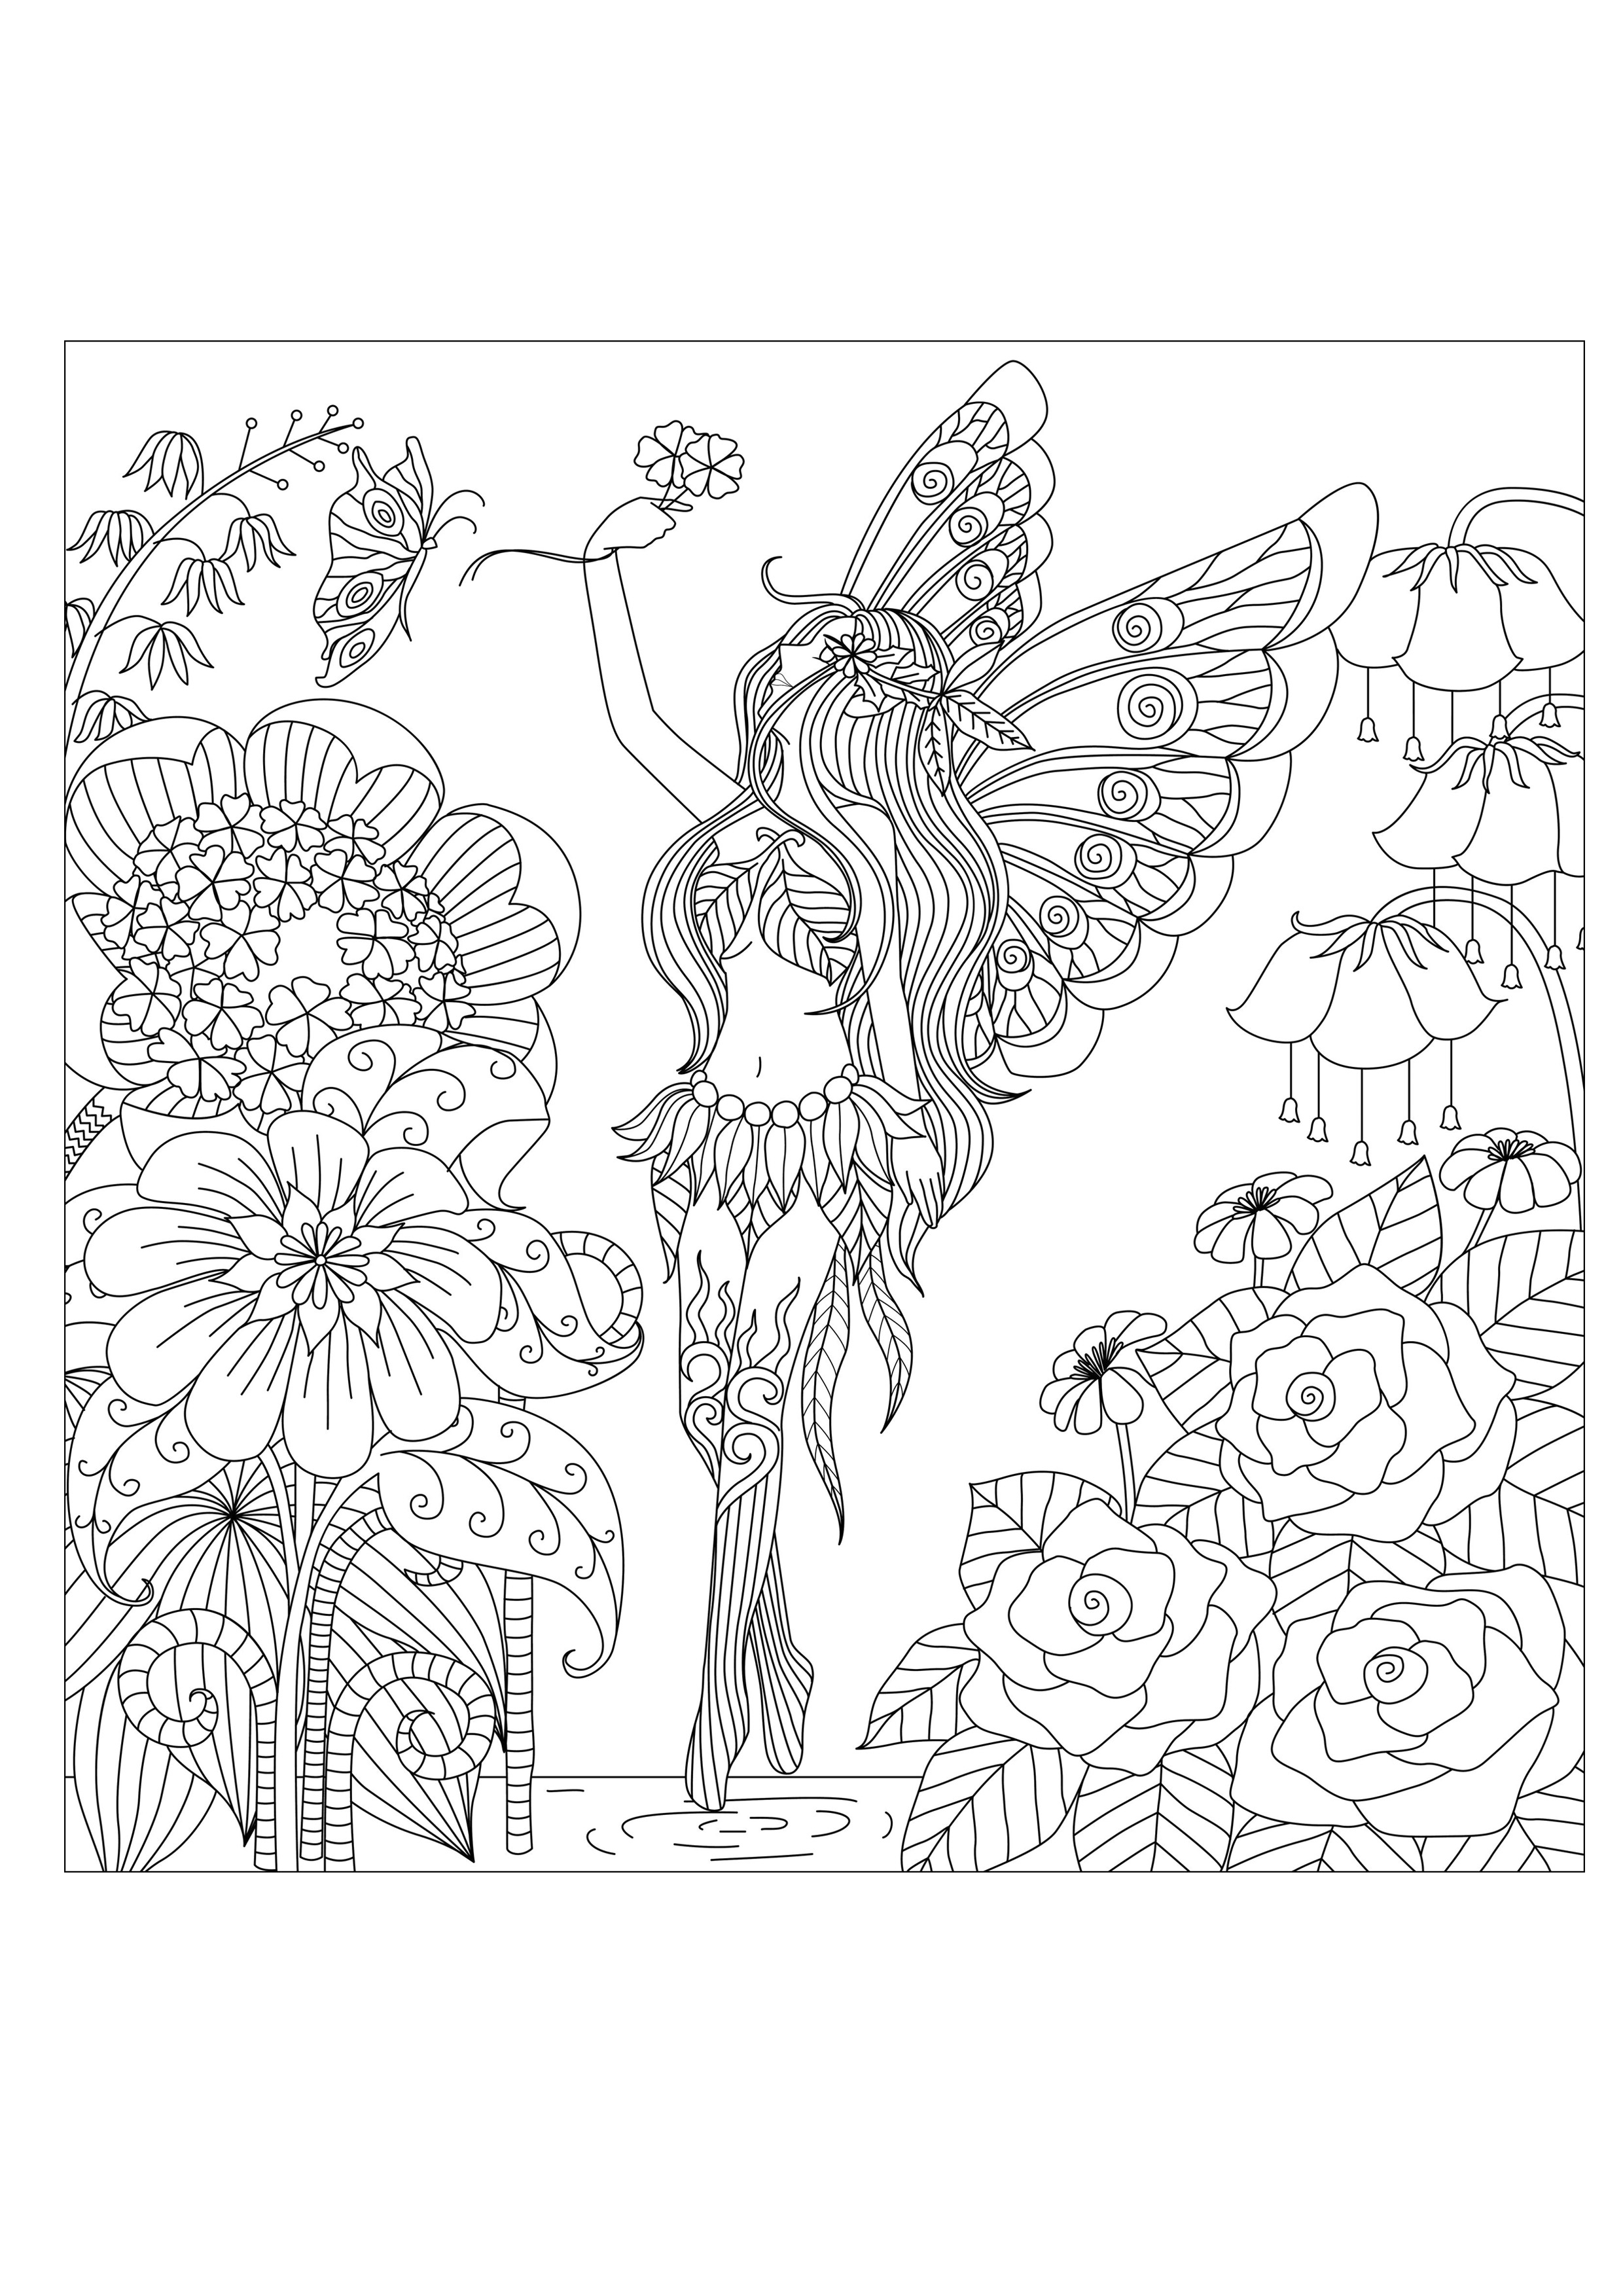 Download Flowers queen - Flowers Adult Coloring Pages